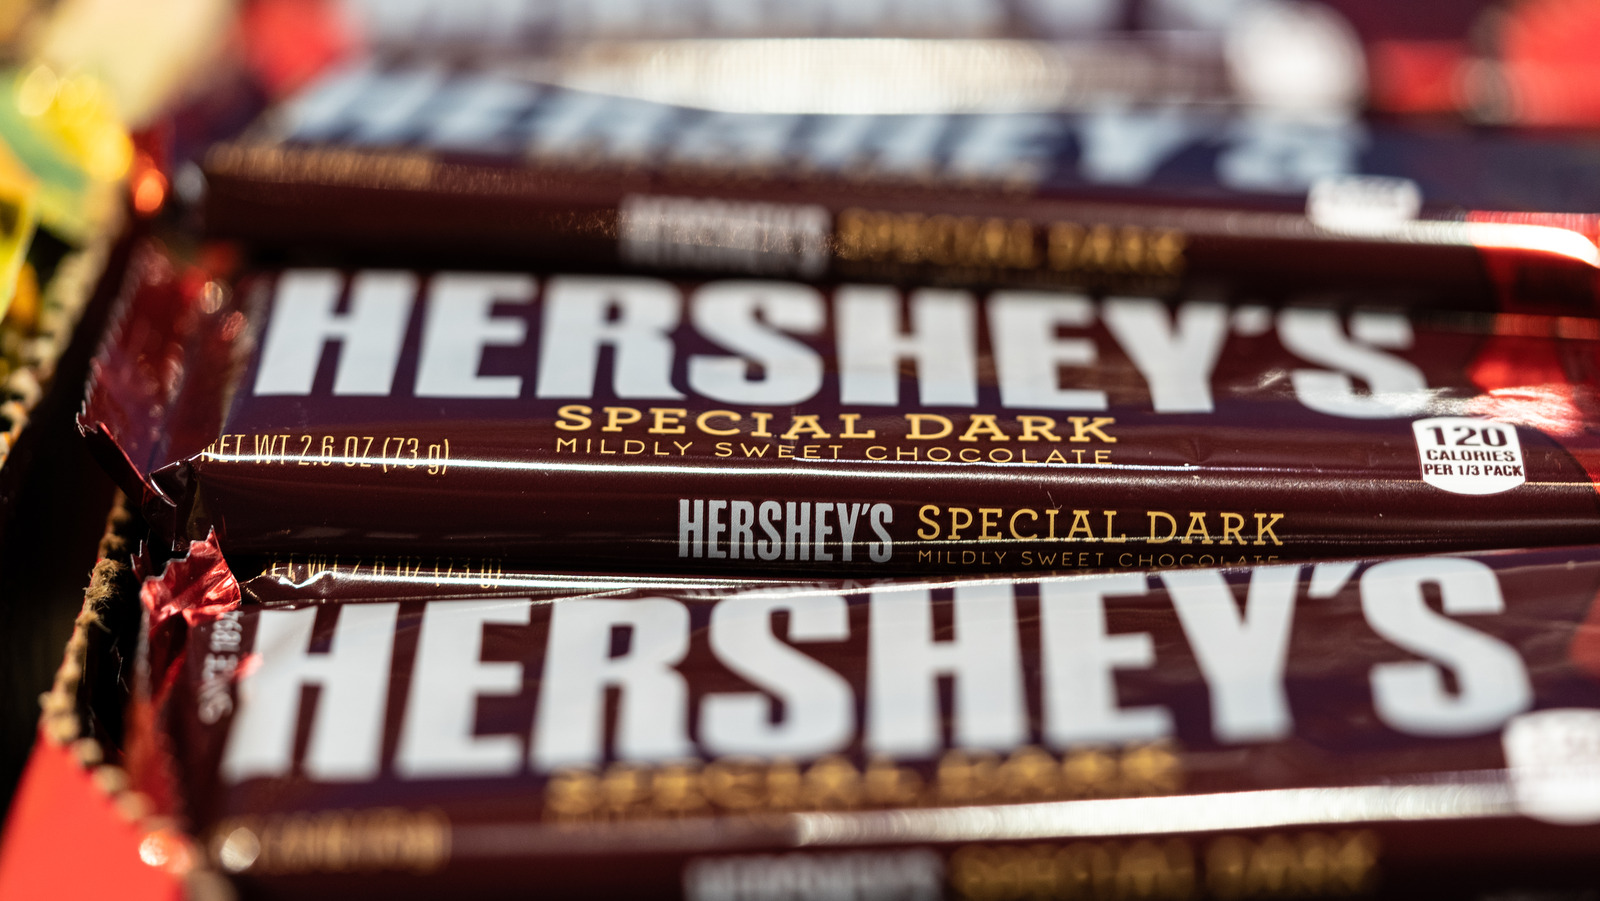 https://www.thedailymeal.com/img/gallery/hershey-faces-lawsuit-over-claims-of-lead-in-dark-chocolate/l-intro-1672430834.jpg